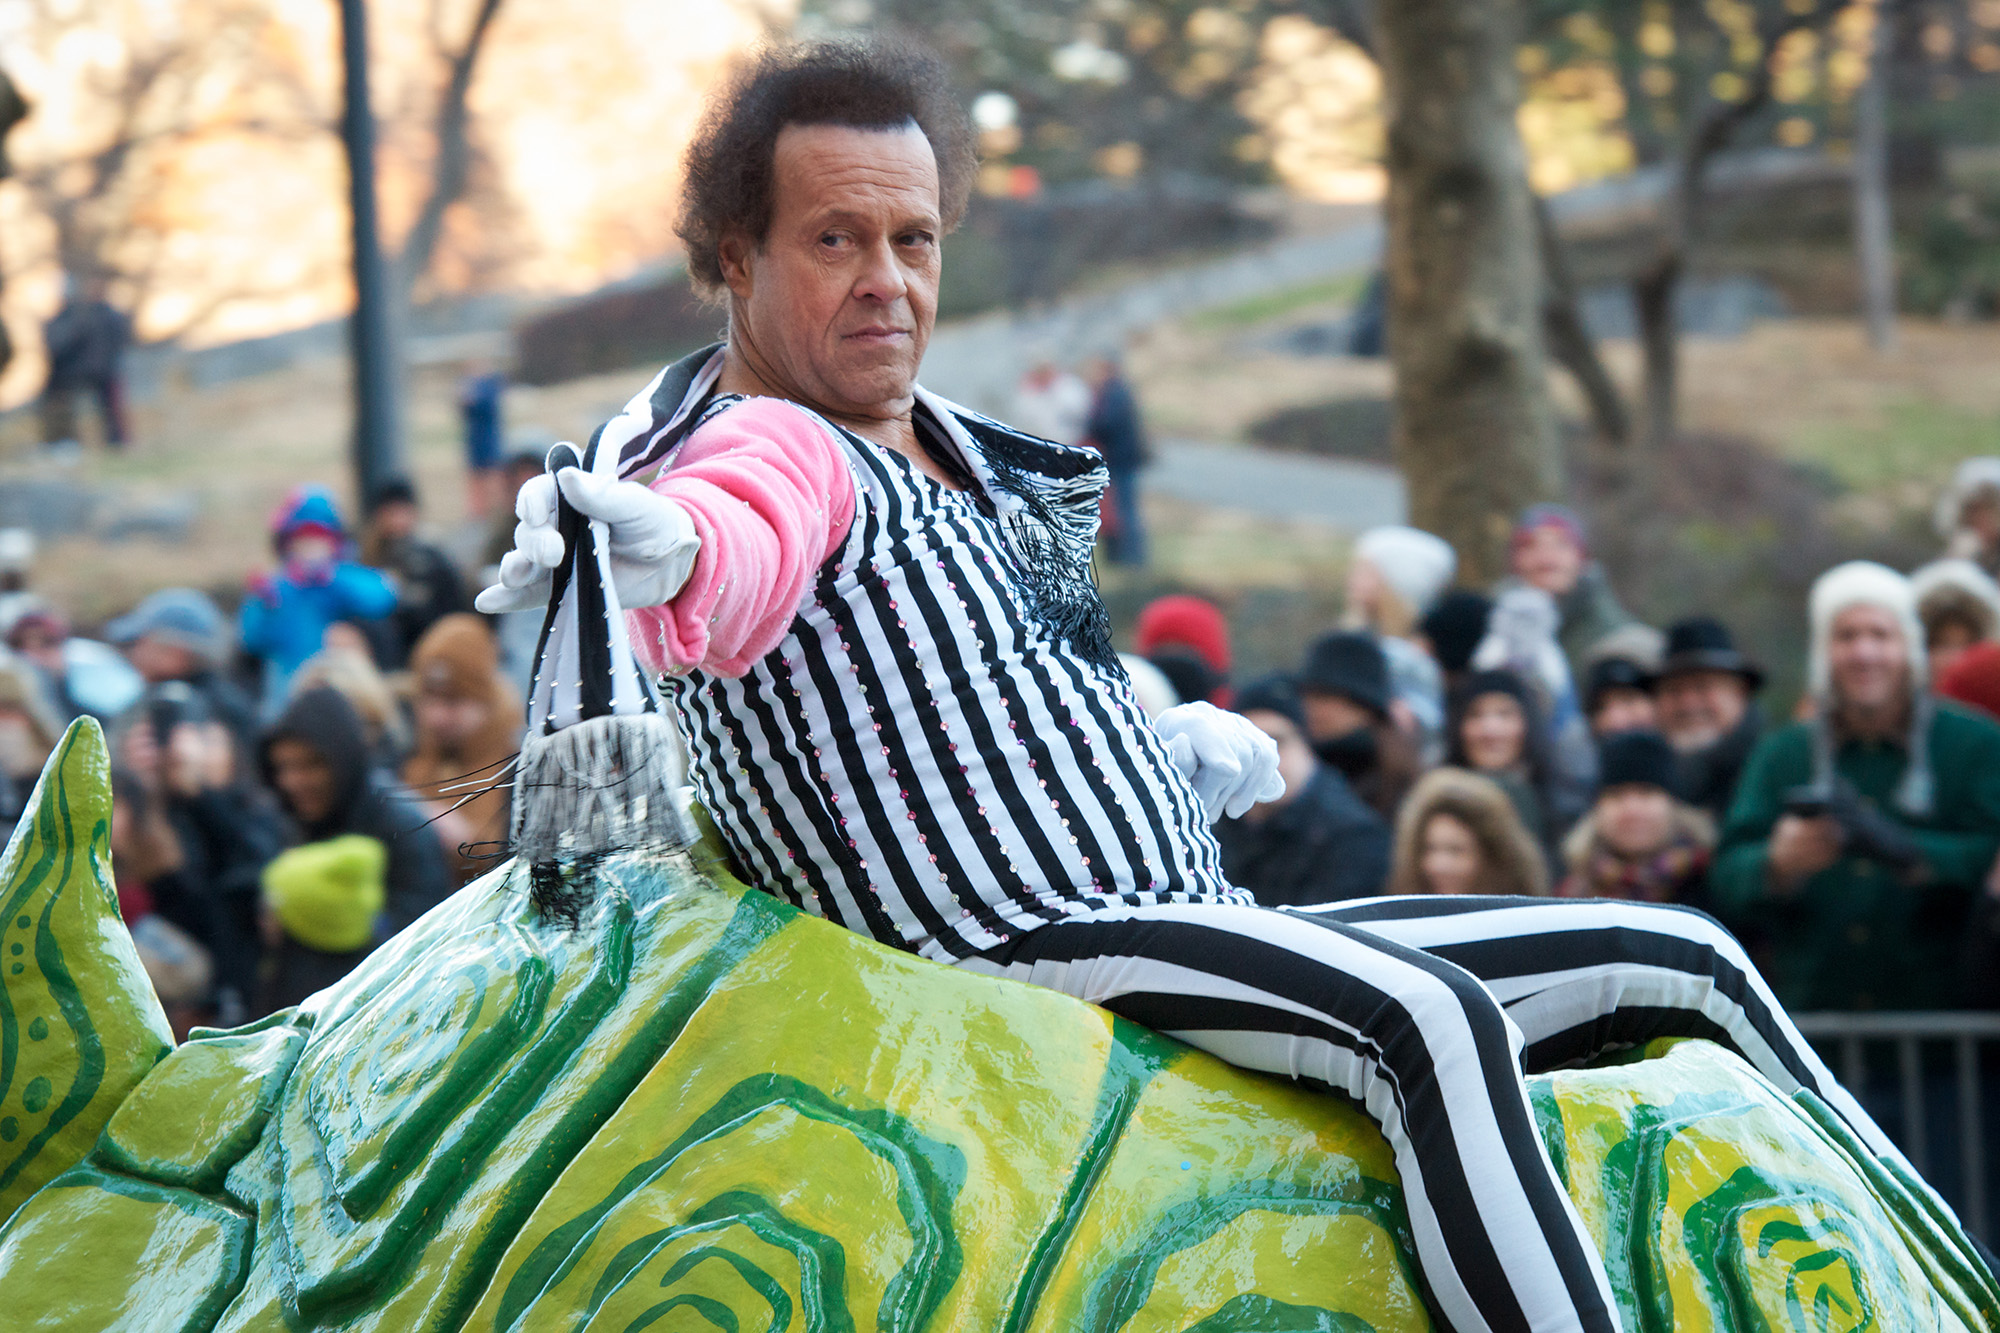 Richard Simmons has released a public statement for the first time in 6 years.